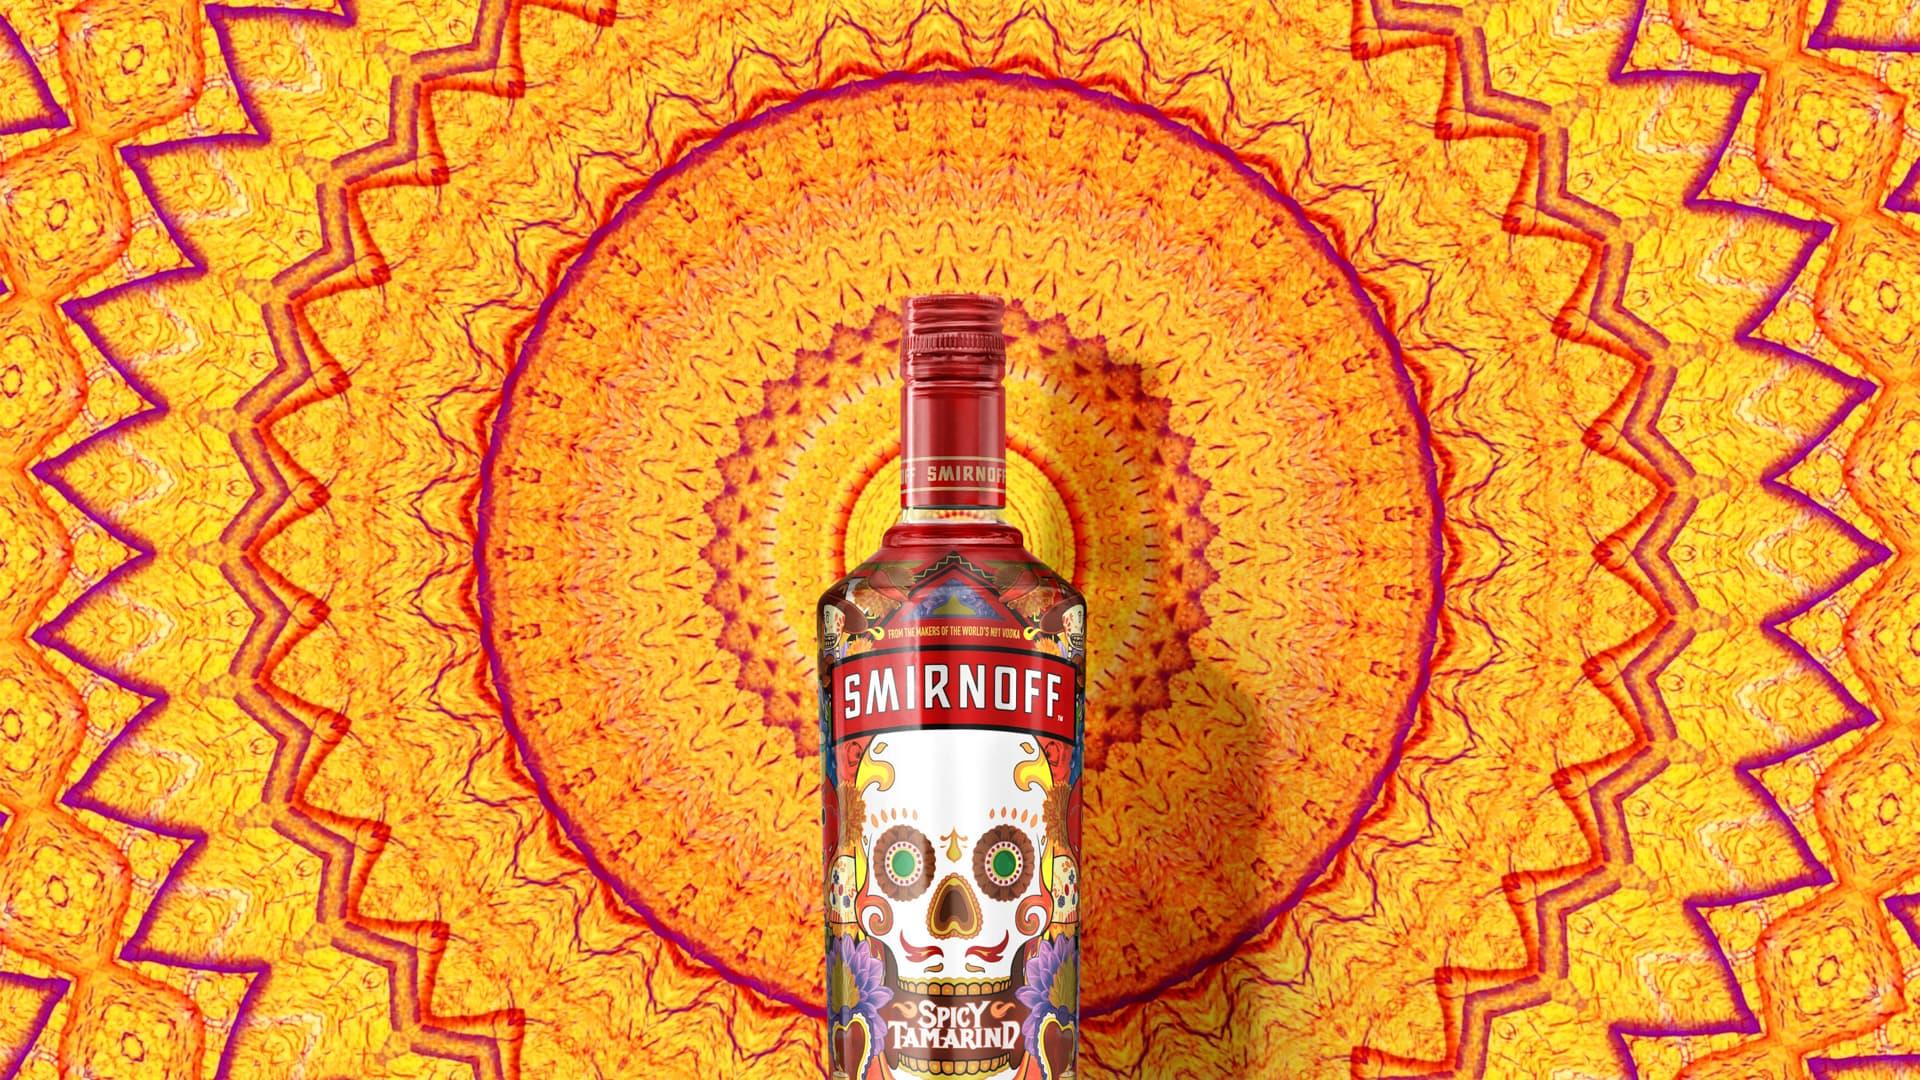 Smirnoff Tamarind on a yellow, red and purple aztec background